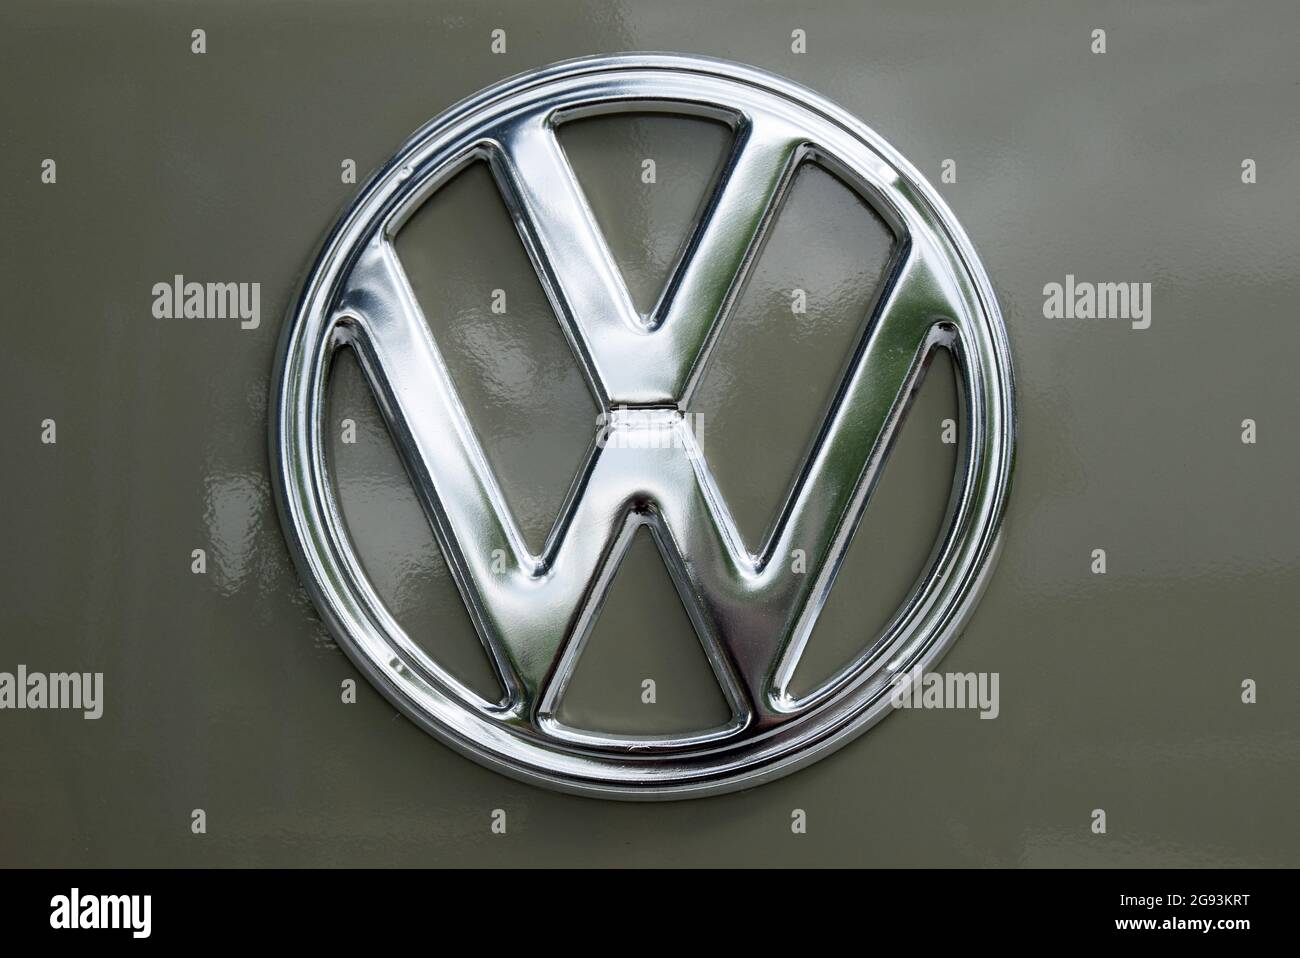 A polished emblem of the Volkswagen group on a gray car Stock Photo